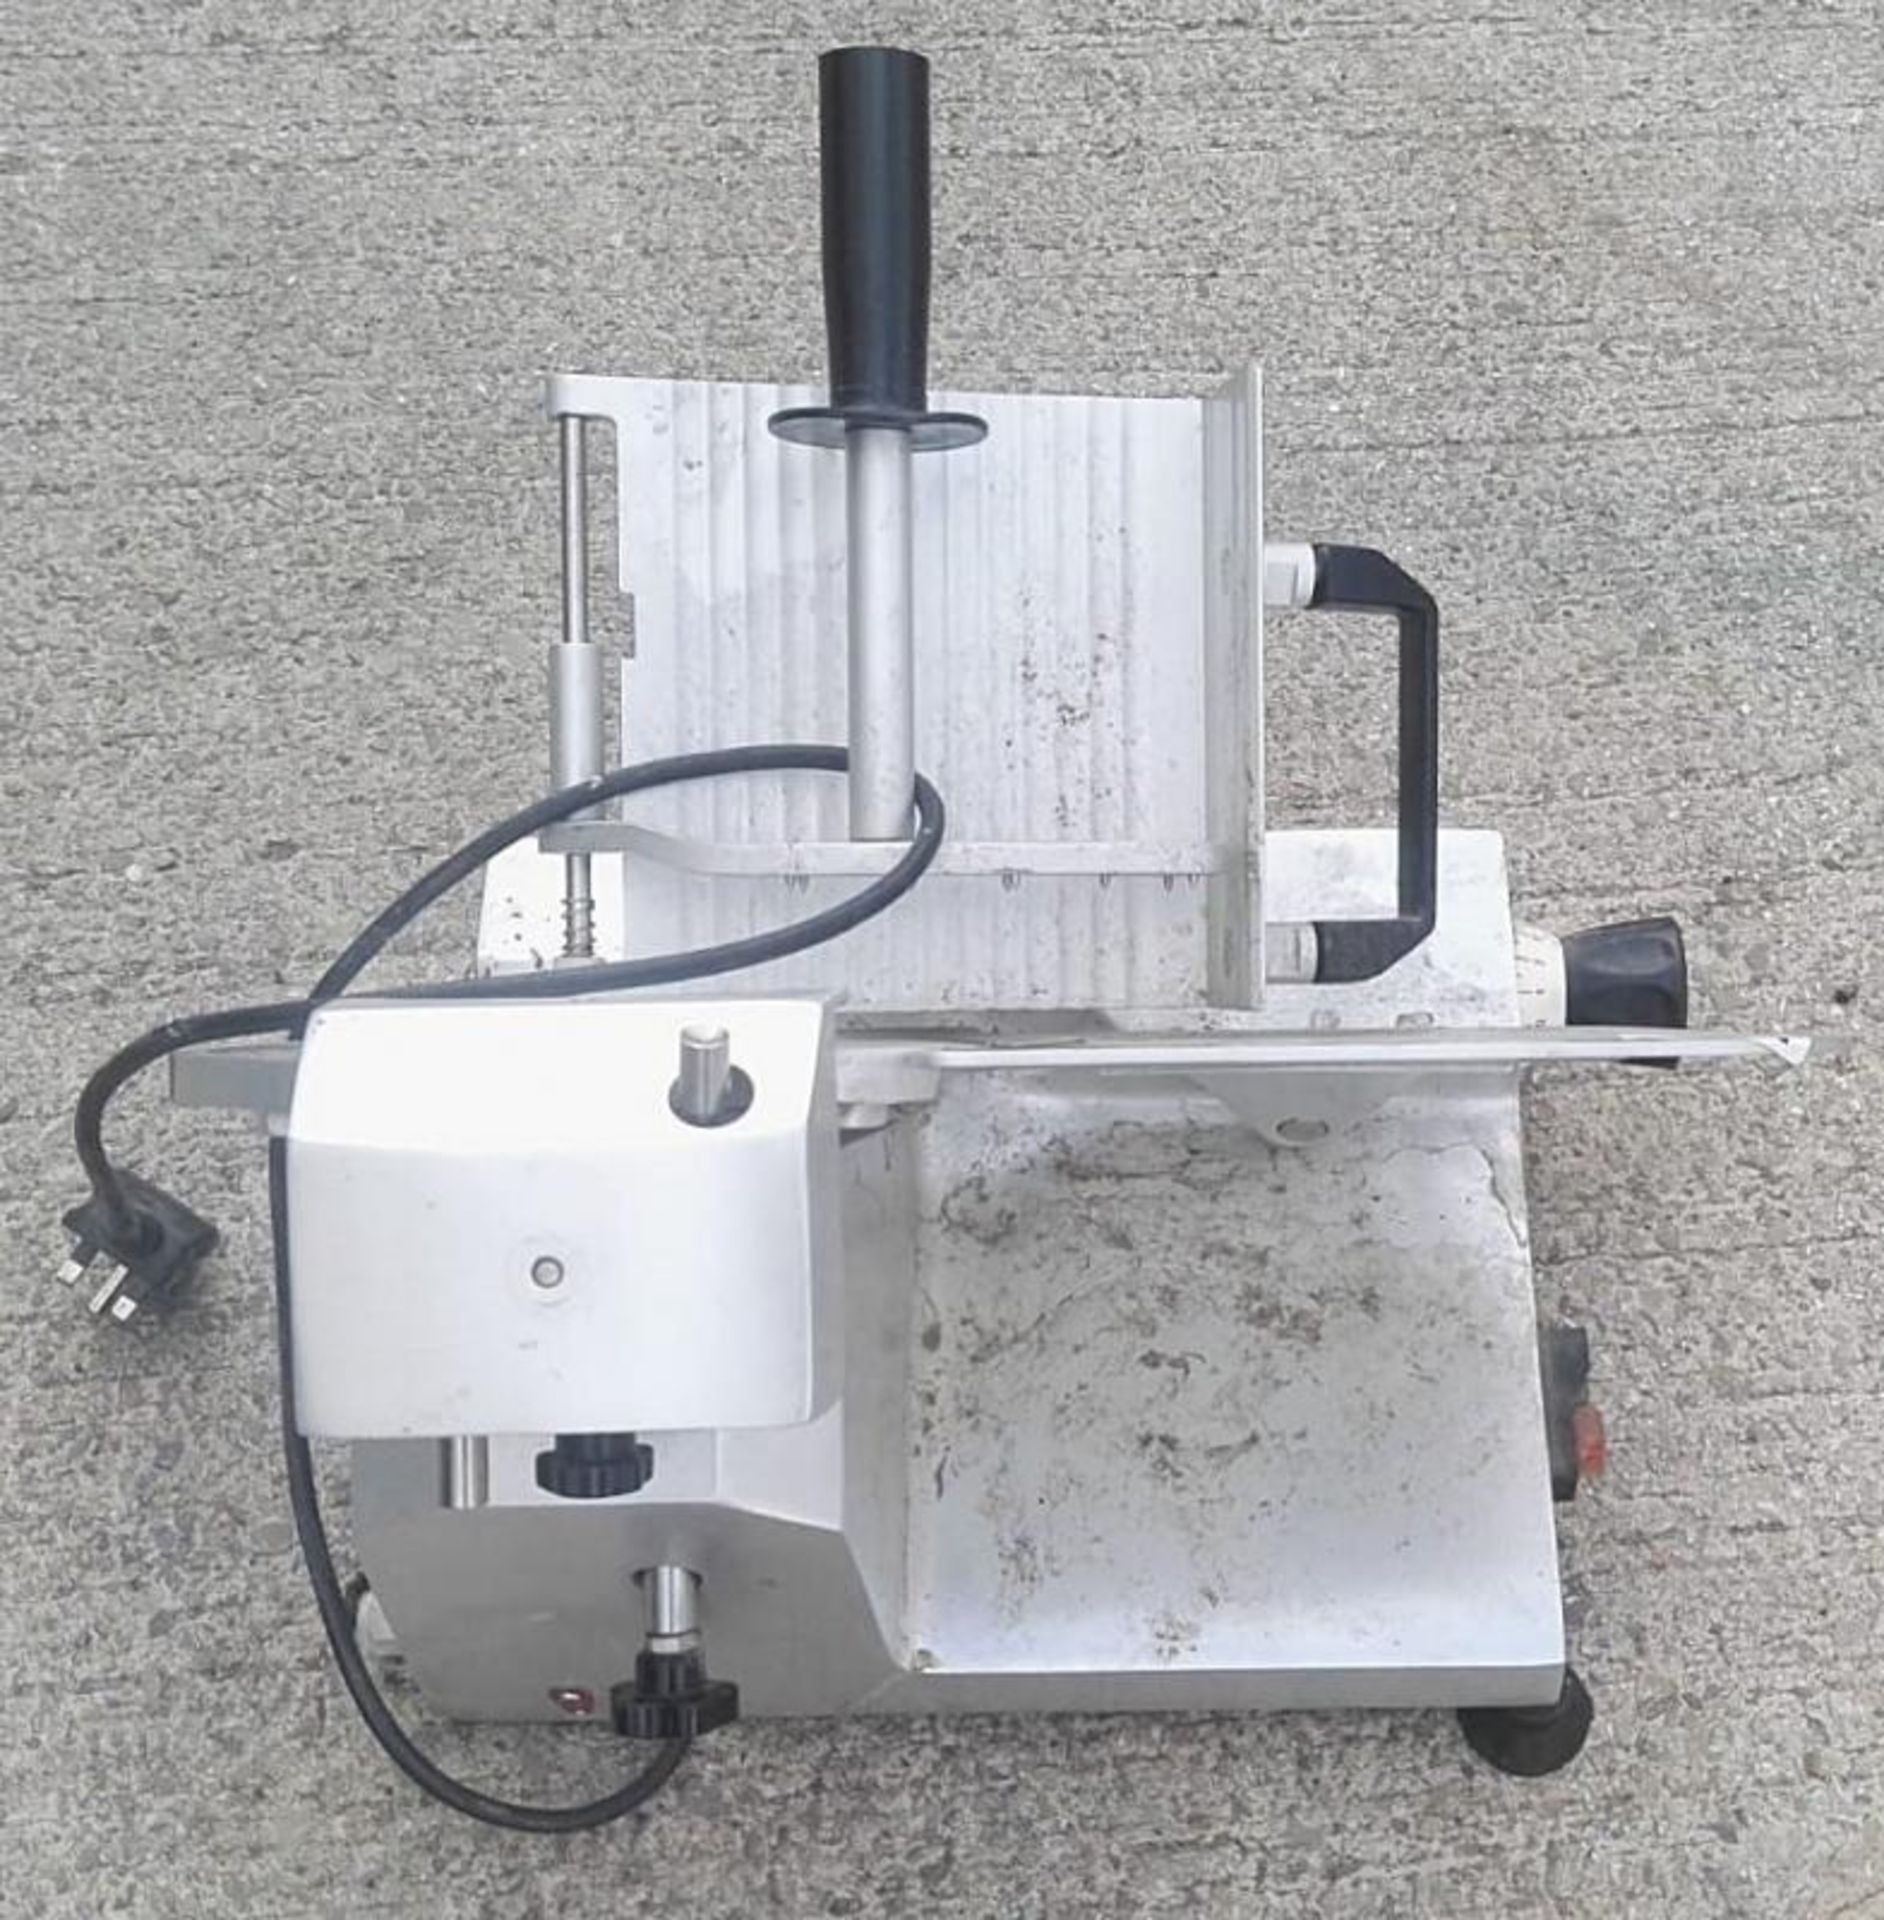 1 x BUFFALO Meat Slicer - Pre-owned, Taken From An Asian Fusion Restaurant - Ref: MC739 - CL540 - WH - Image 2 of 3